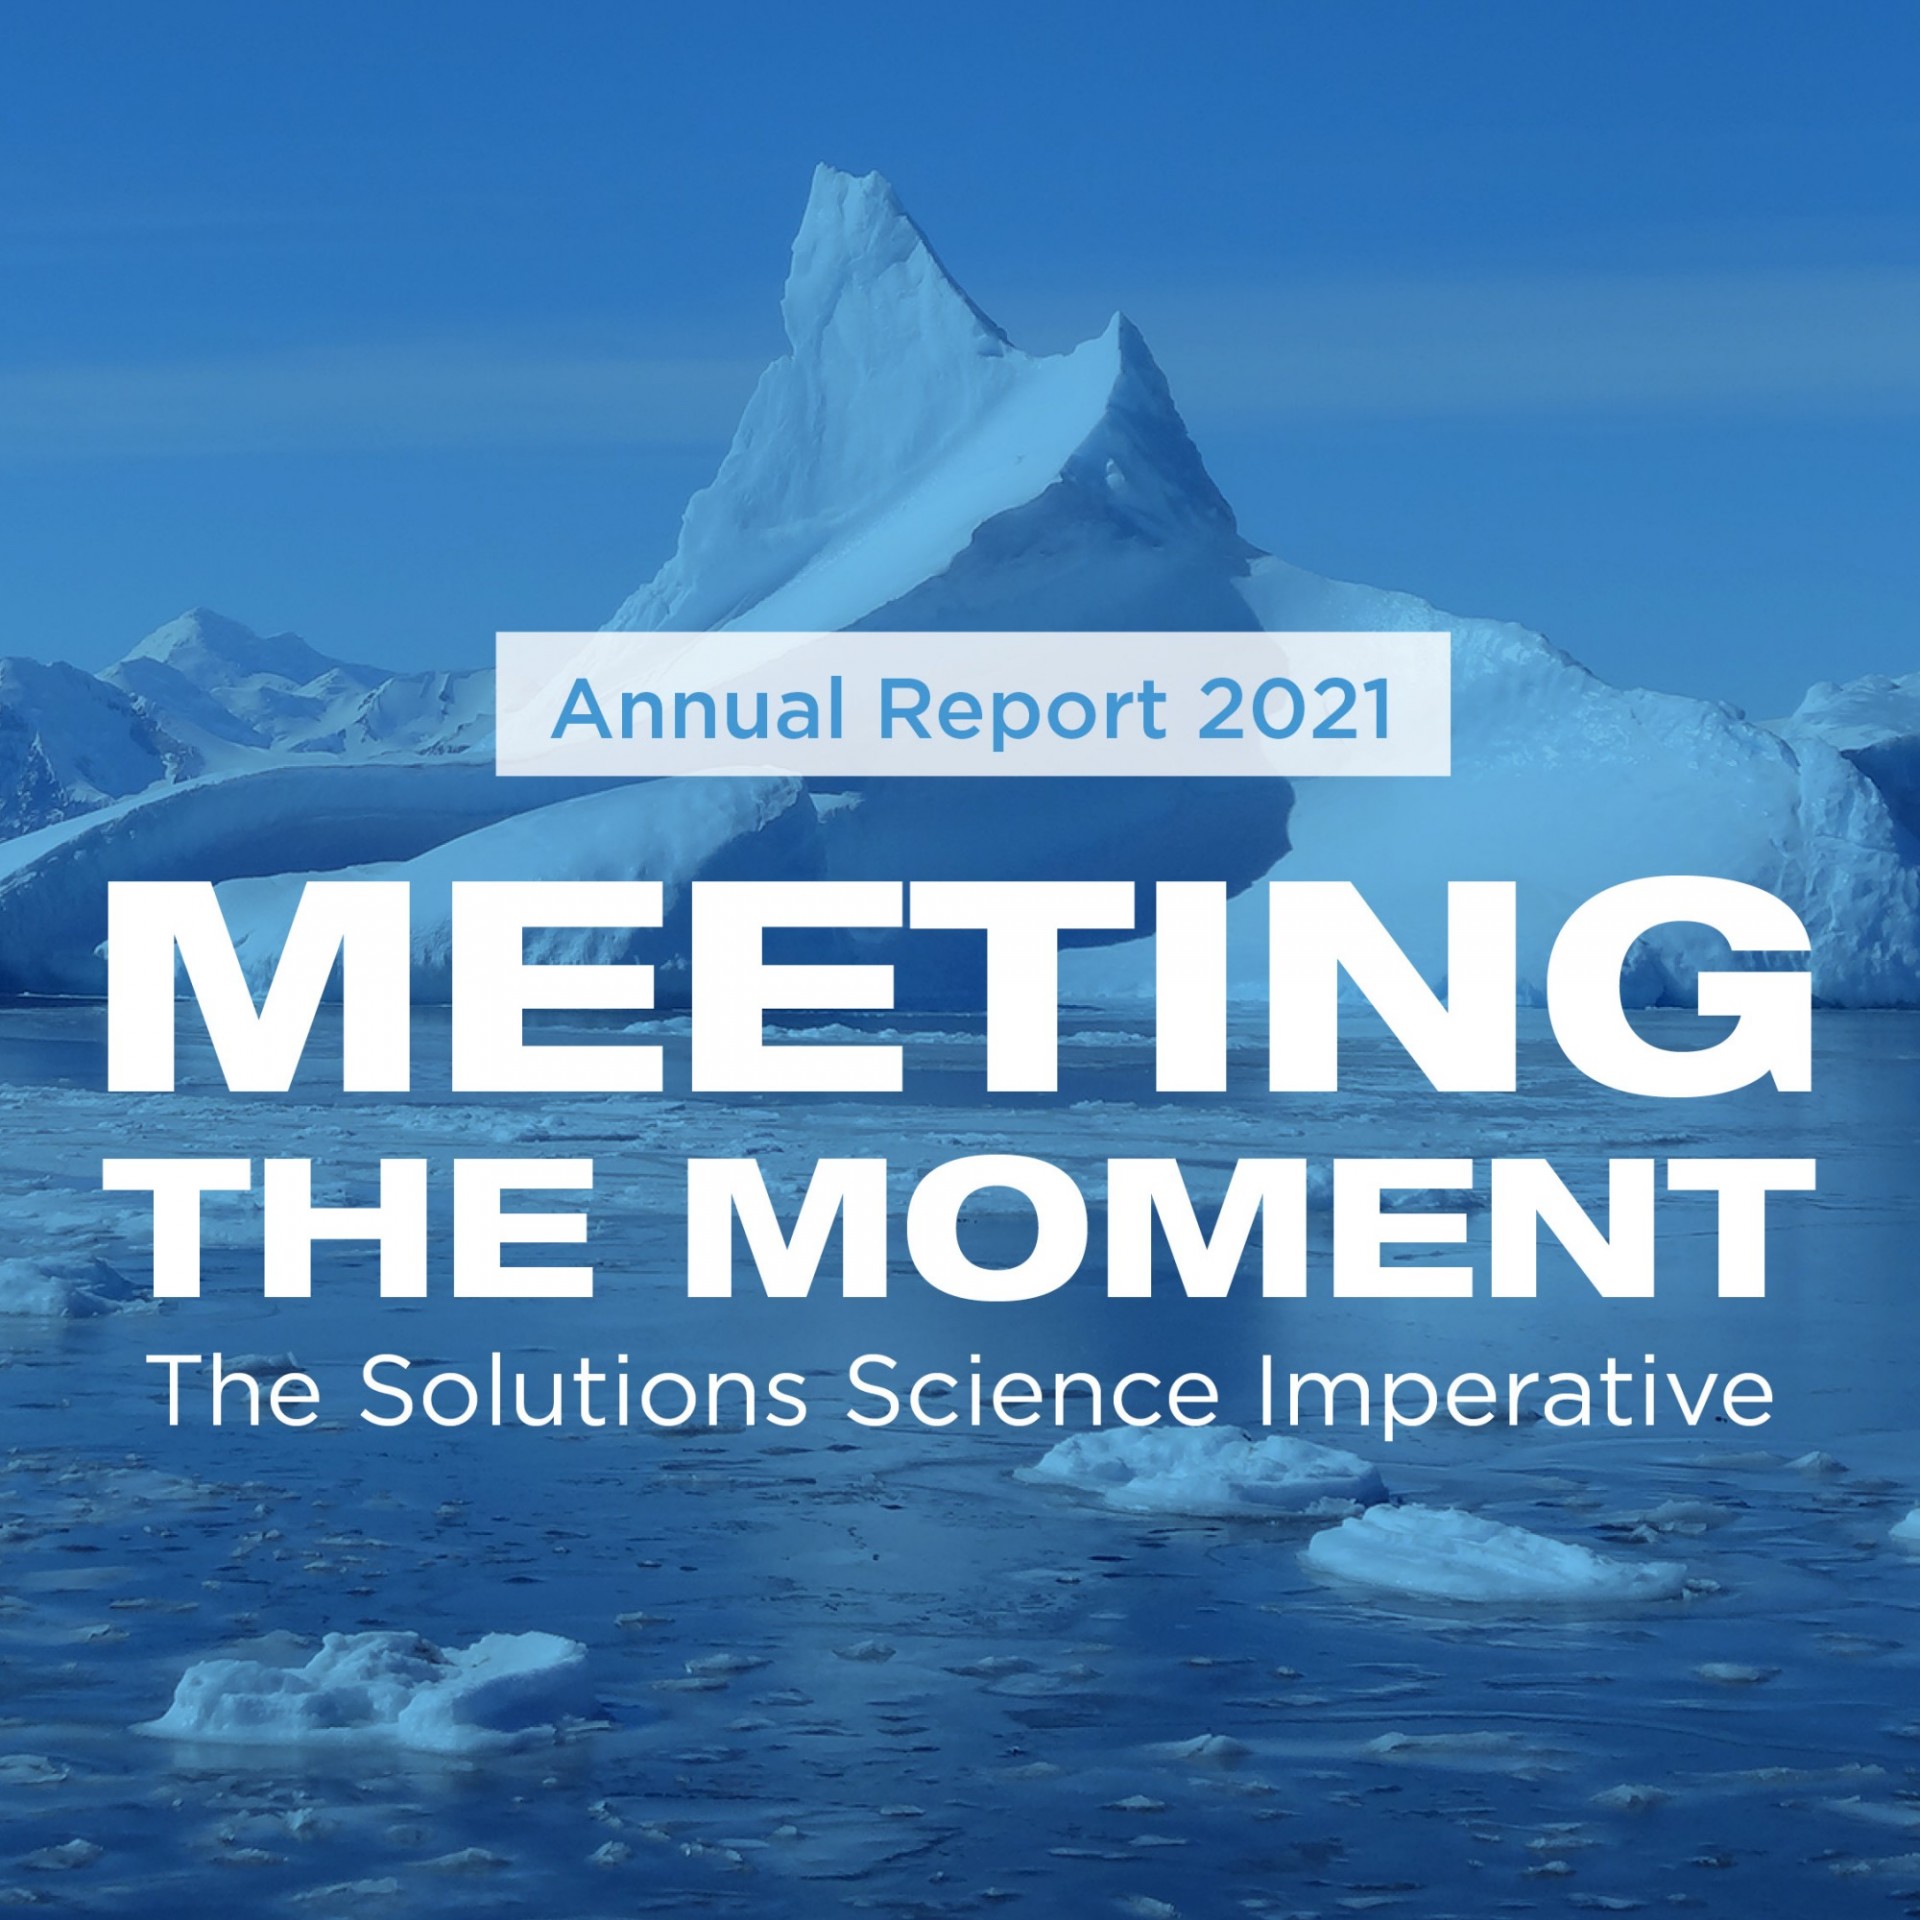 2021 Annual Report: Meeting the Moment - The Solutions Science Imperative